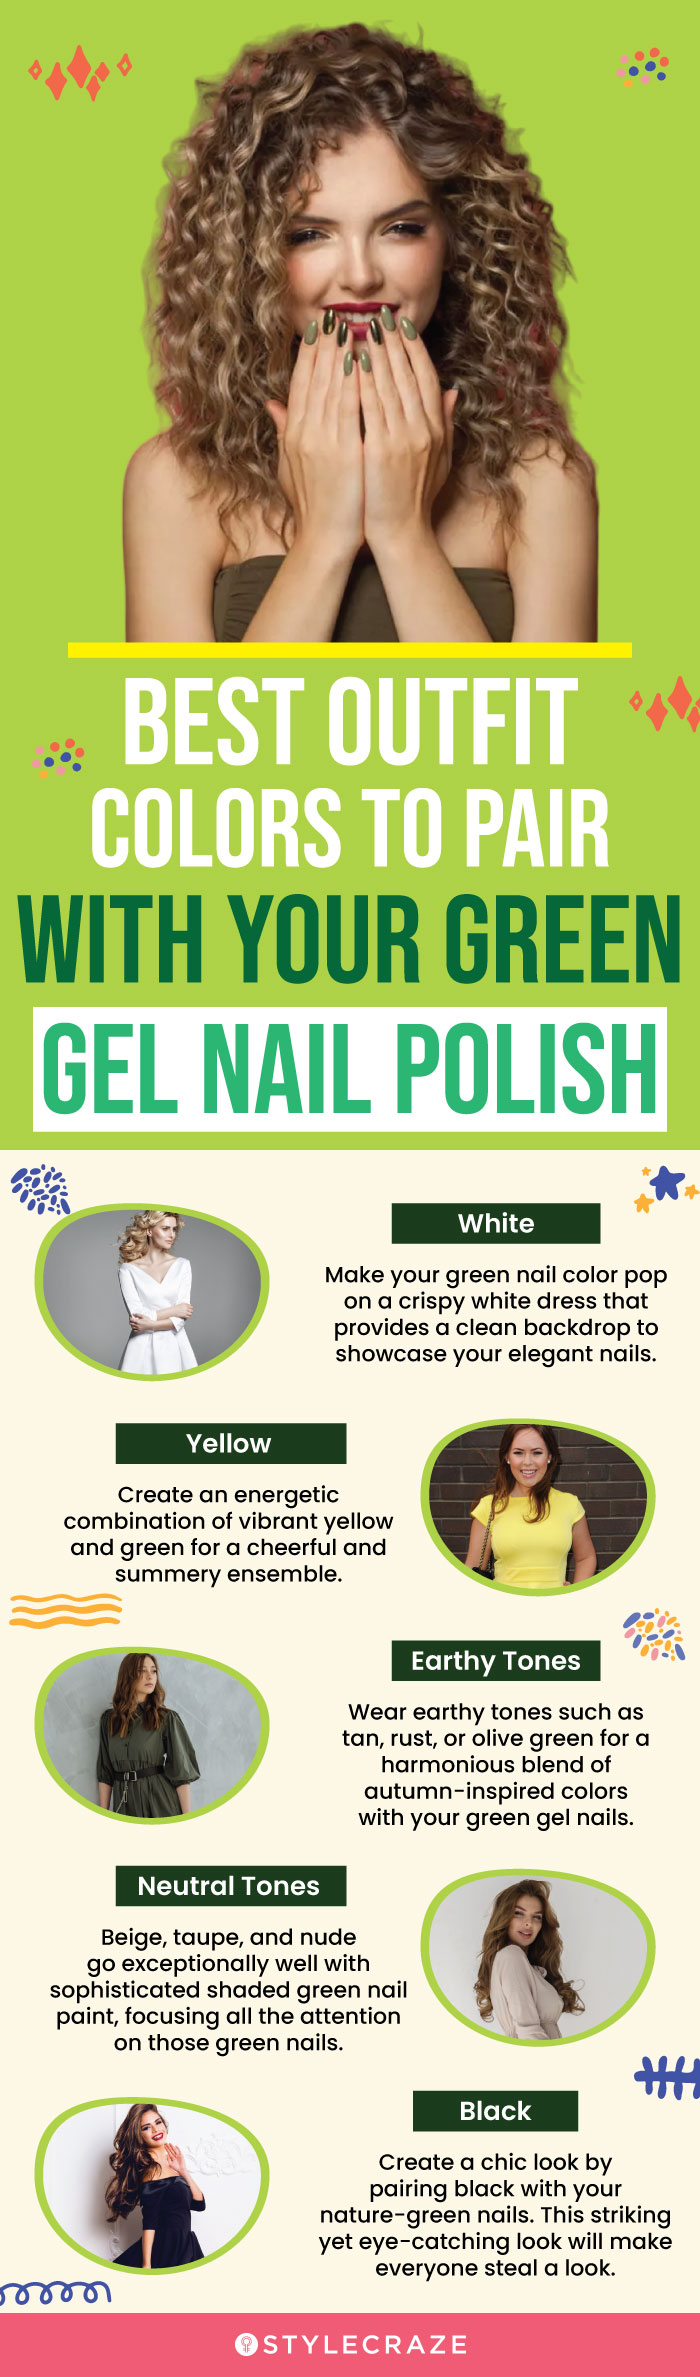 Best Outfit Colors To Pair With Your Green Gel Nail Polish (infographic)